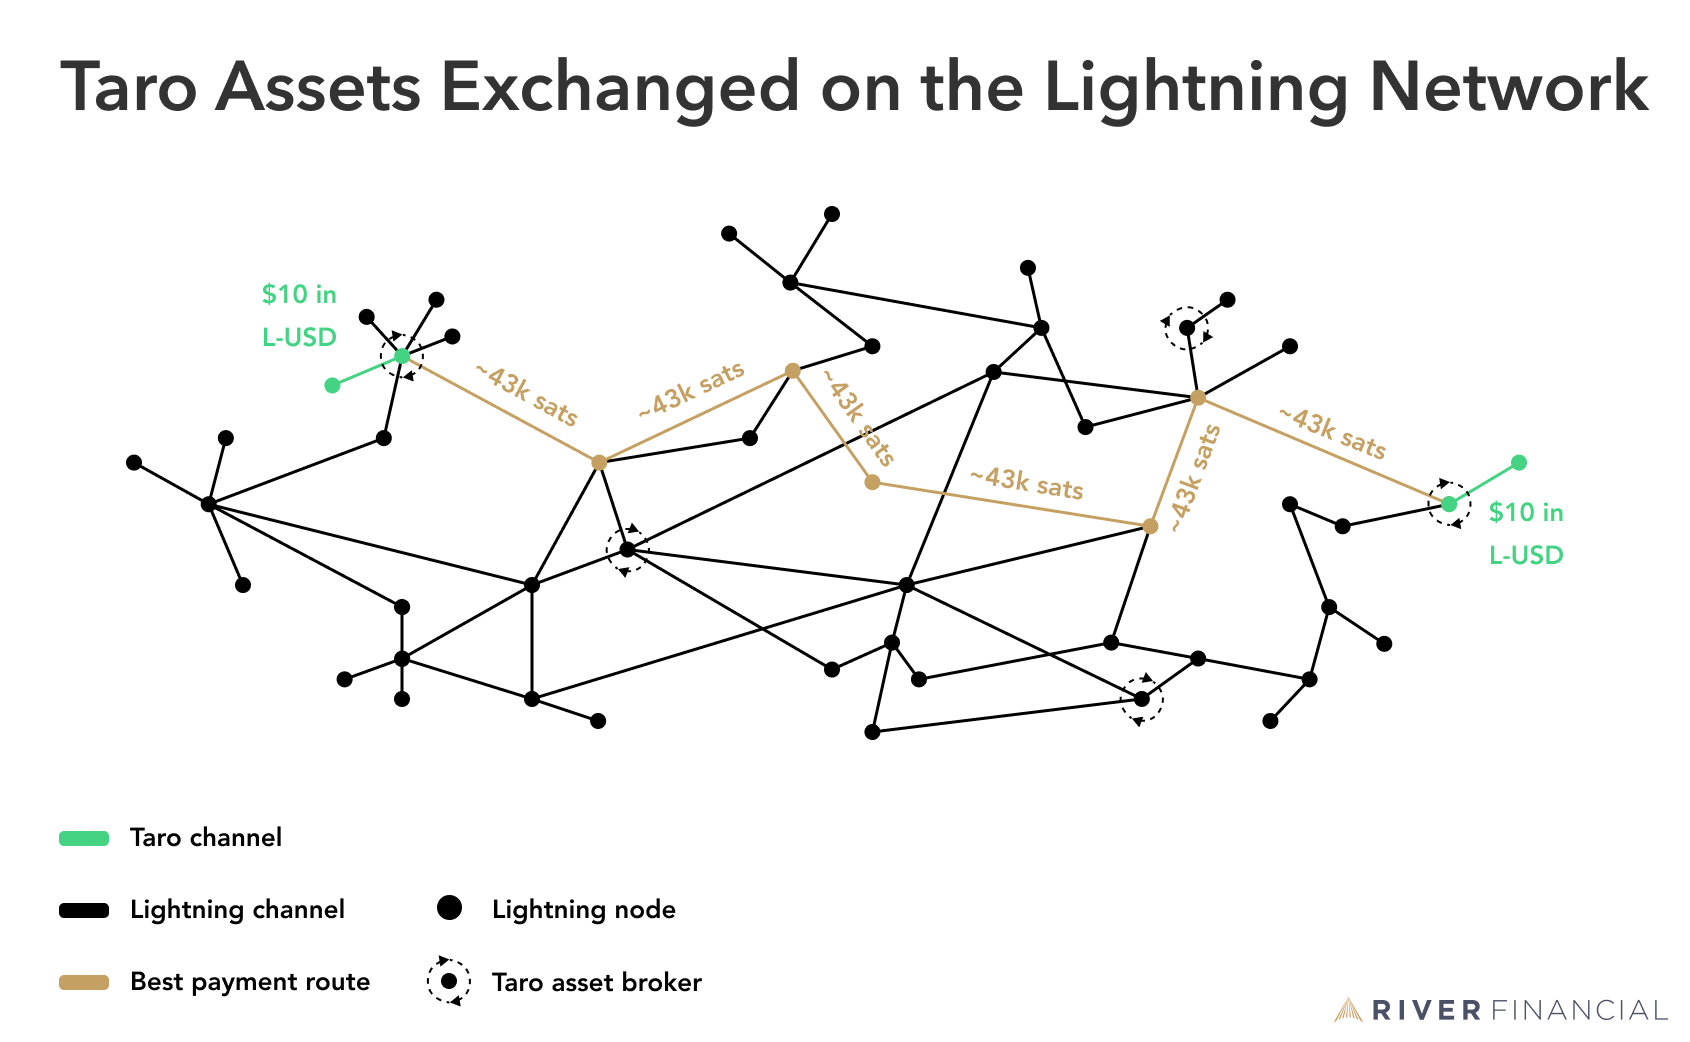 Taro assets exchanged on the Lightning Network